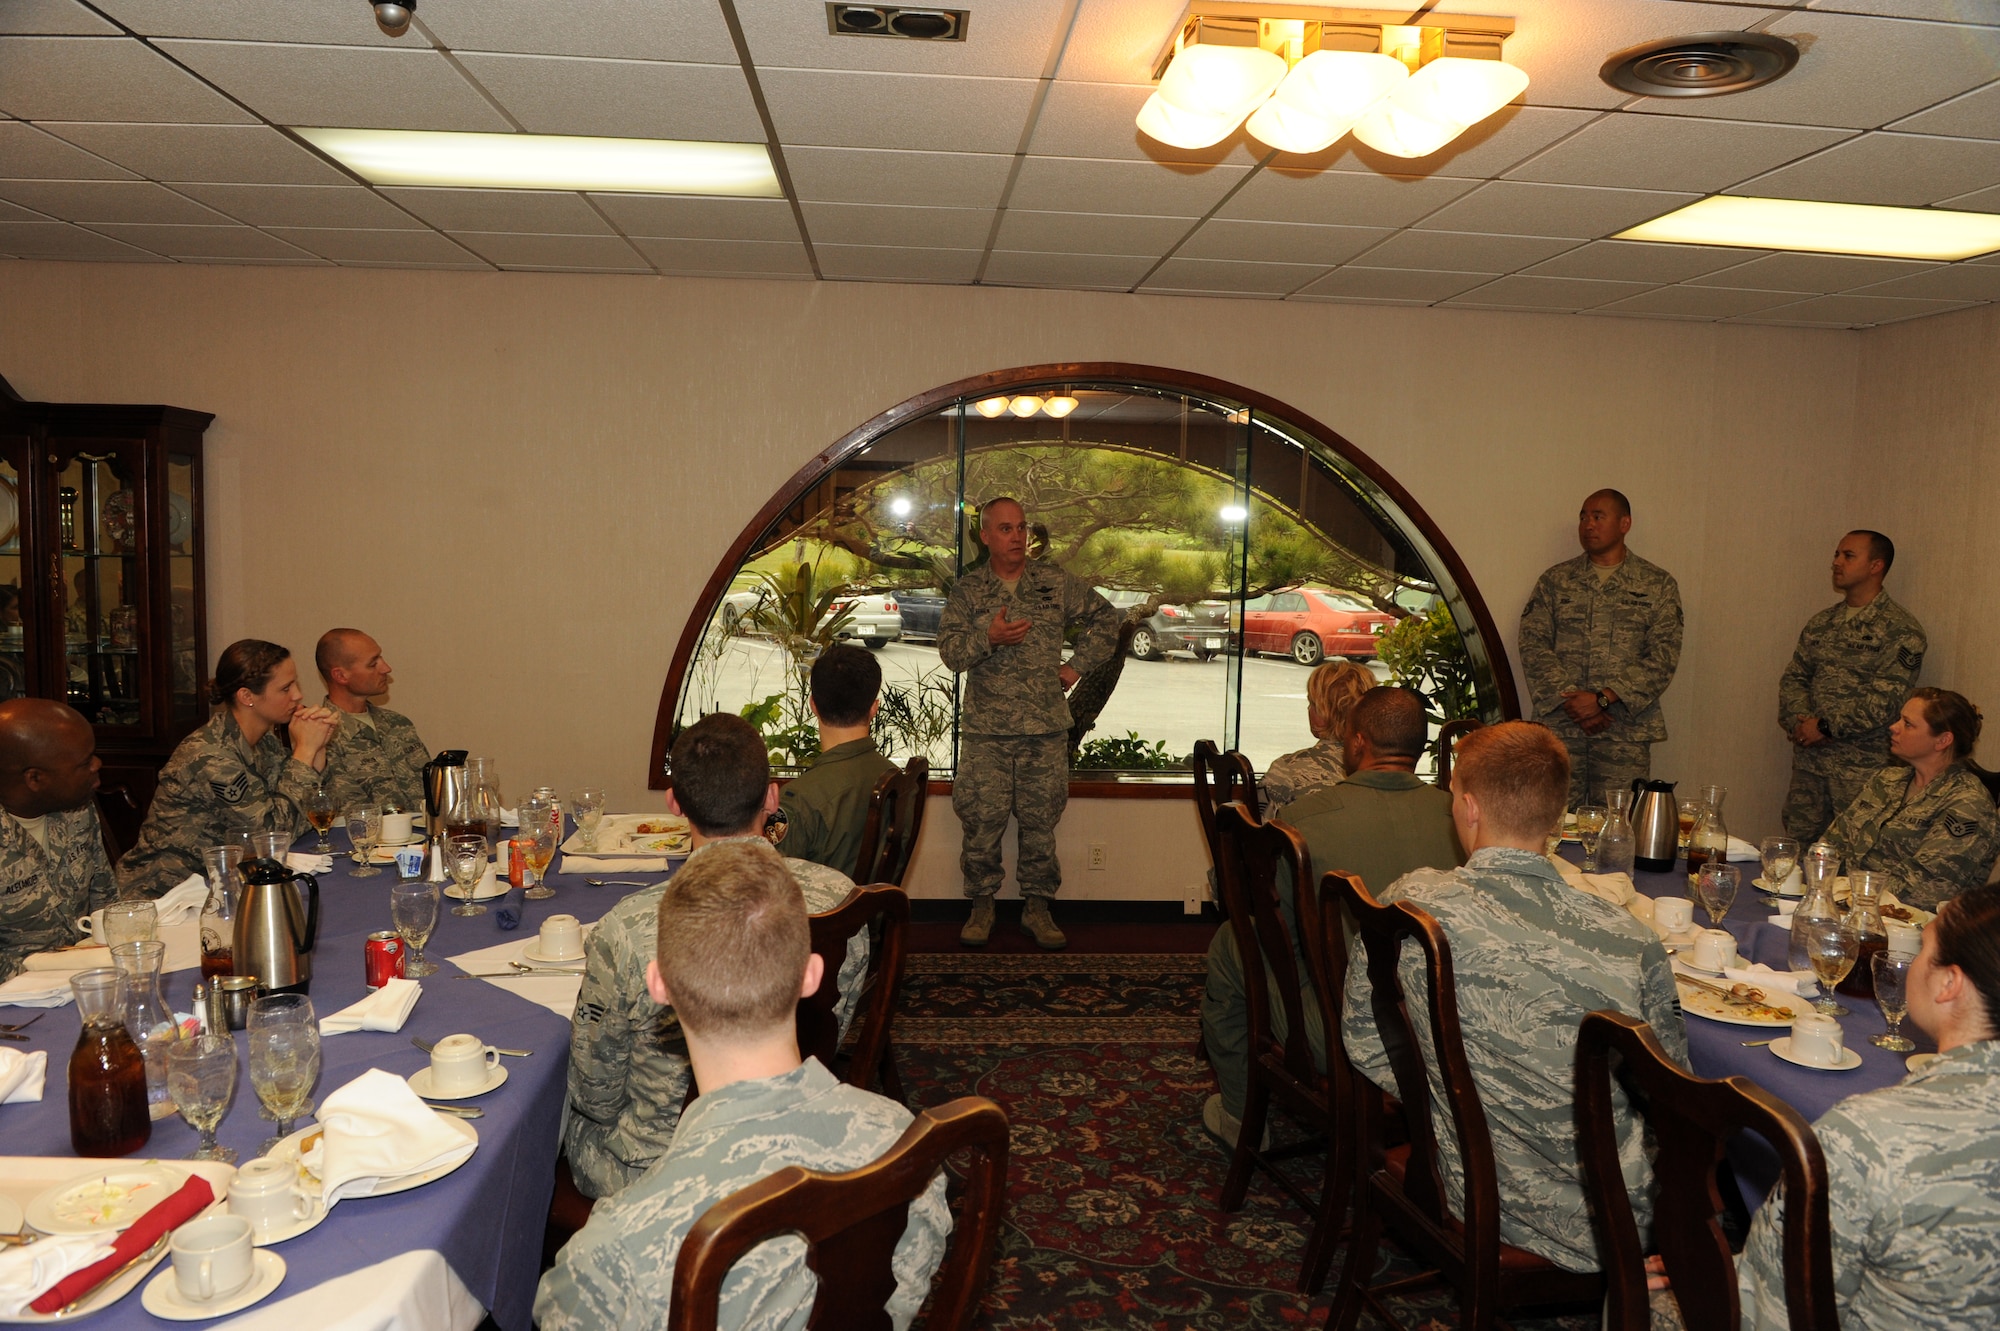 U.S. Air Force Brig. Gen. Gary Ebben, Wisconsin National Guard assistant adjutant general, speaks to members of the 115th Fighter Wing from the Wisconsin Air National Guard during a lunch at the Officer’s Club on Kadena Air Base, Japan, March 4, 2015. During the lunch, a few awards were given out and a lieutenant was promoted to captain. (U.S. Air Force photo by Airman 1st Class Stephen G. Eigel)  